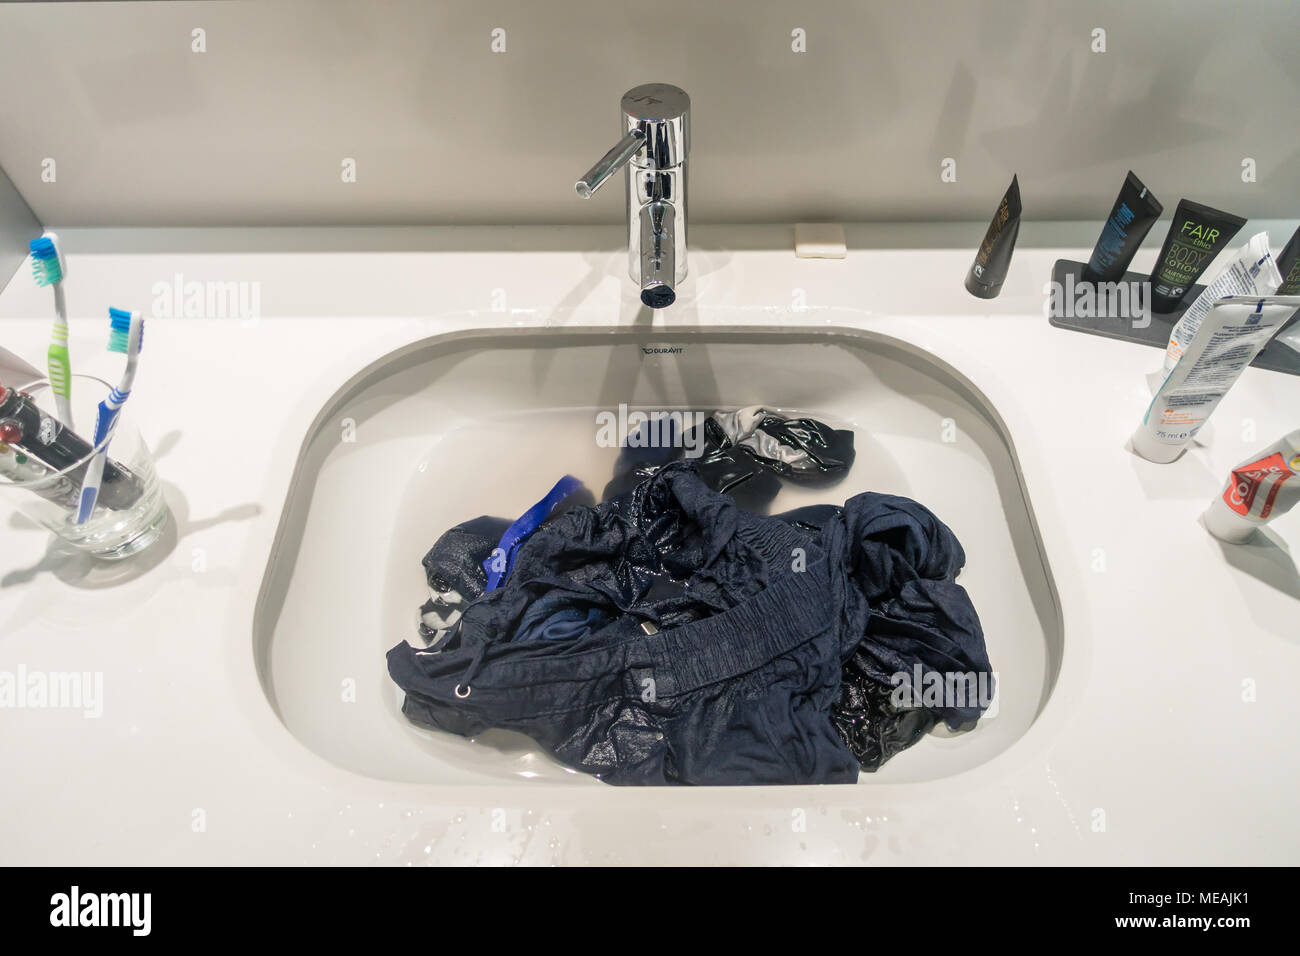 Washing laundry in a hotel sink. Stock Photo